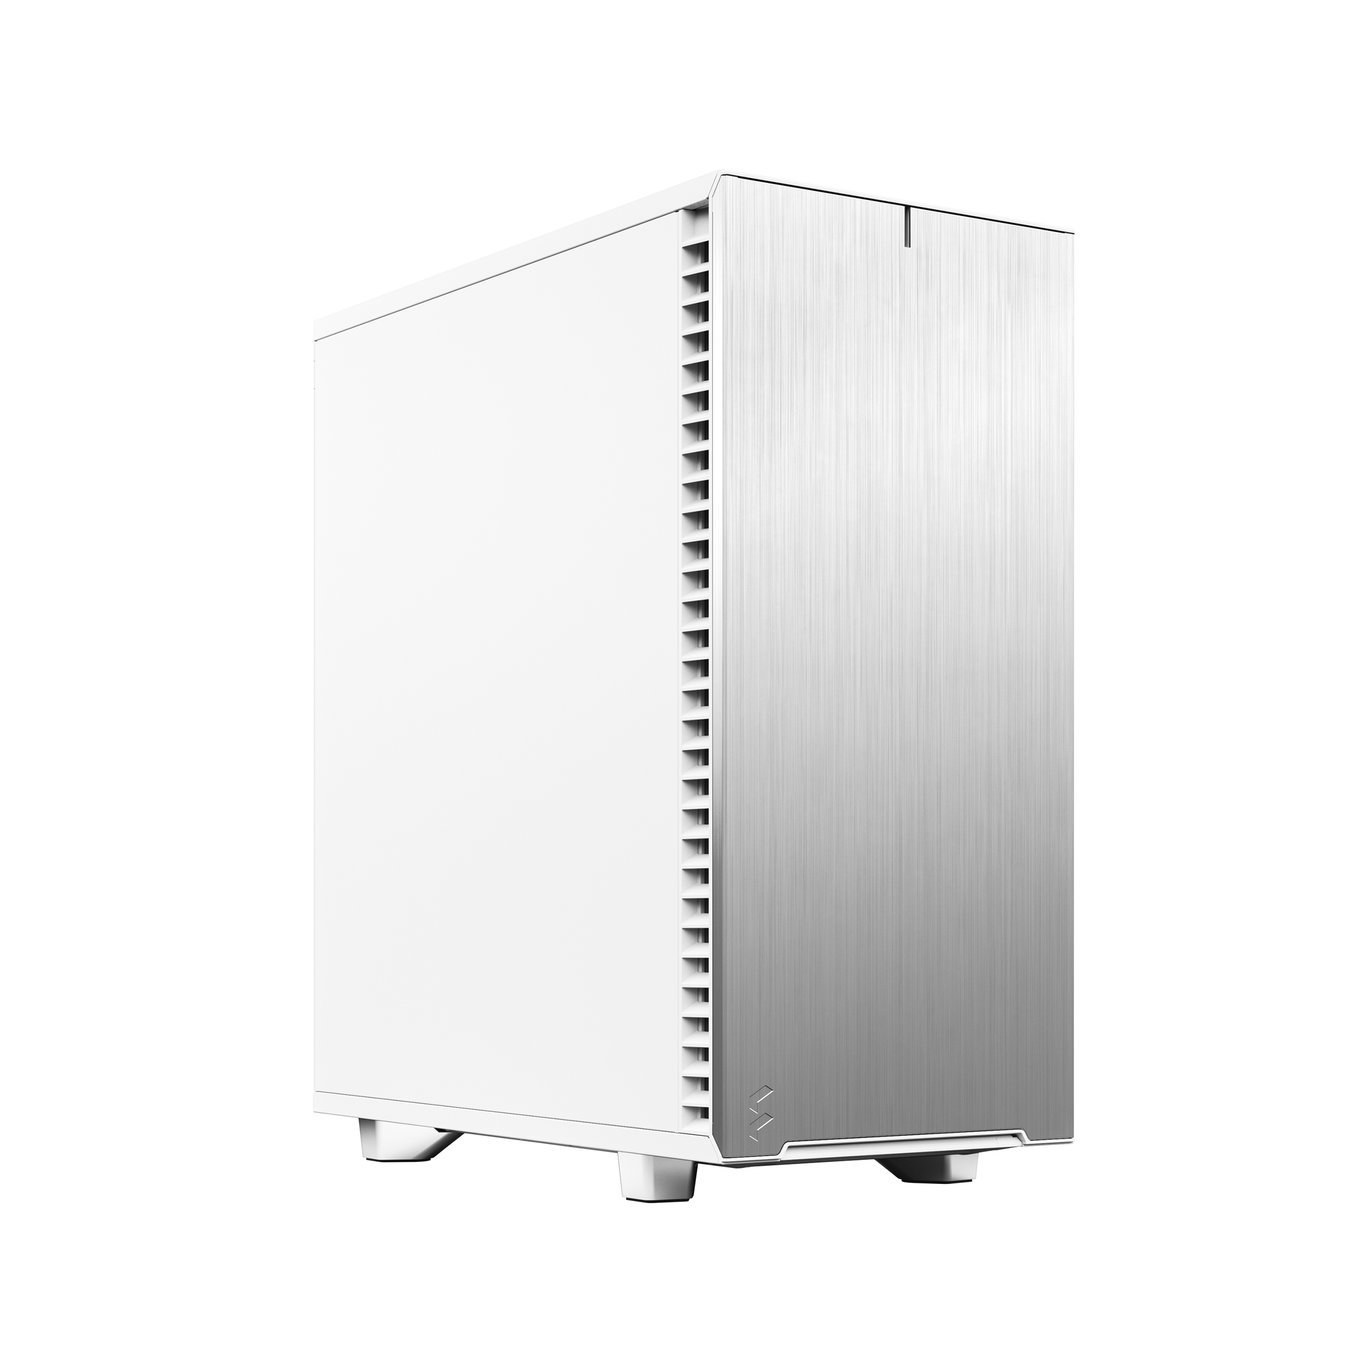 Fractal Design Define 7 Compact Solid ATX 機箱 - White 白色